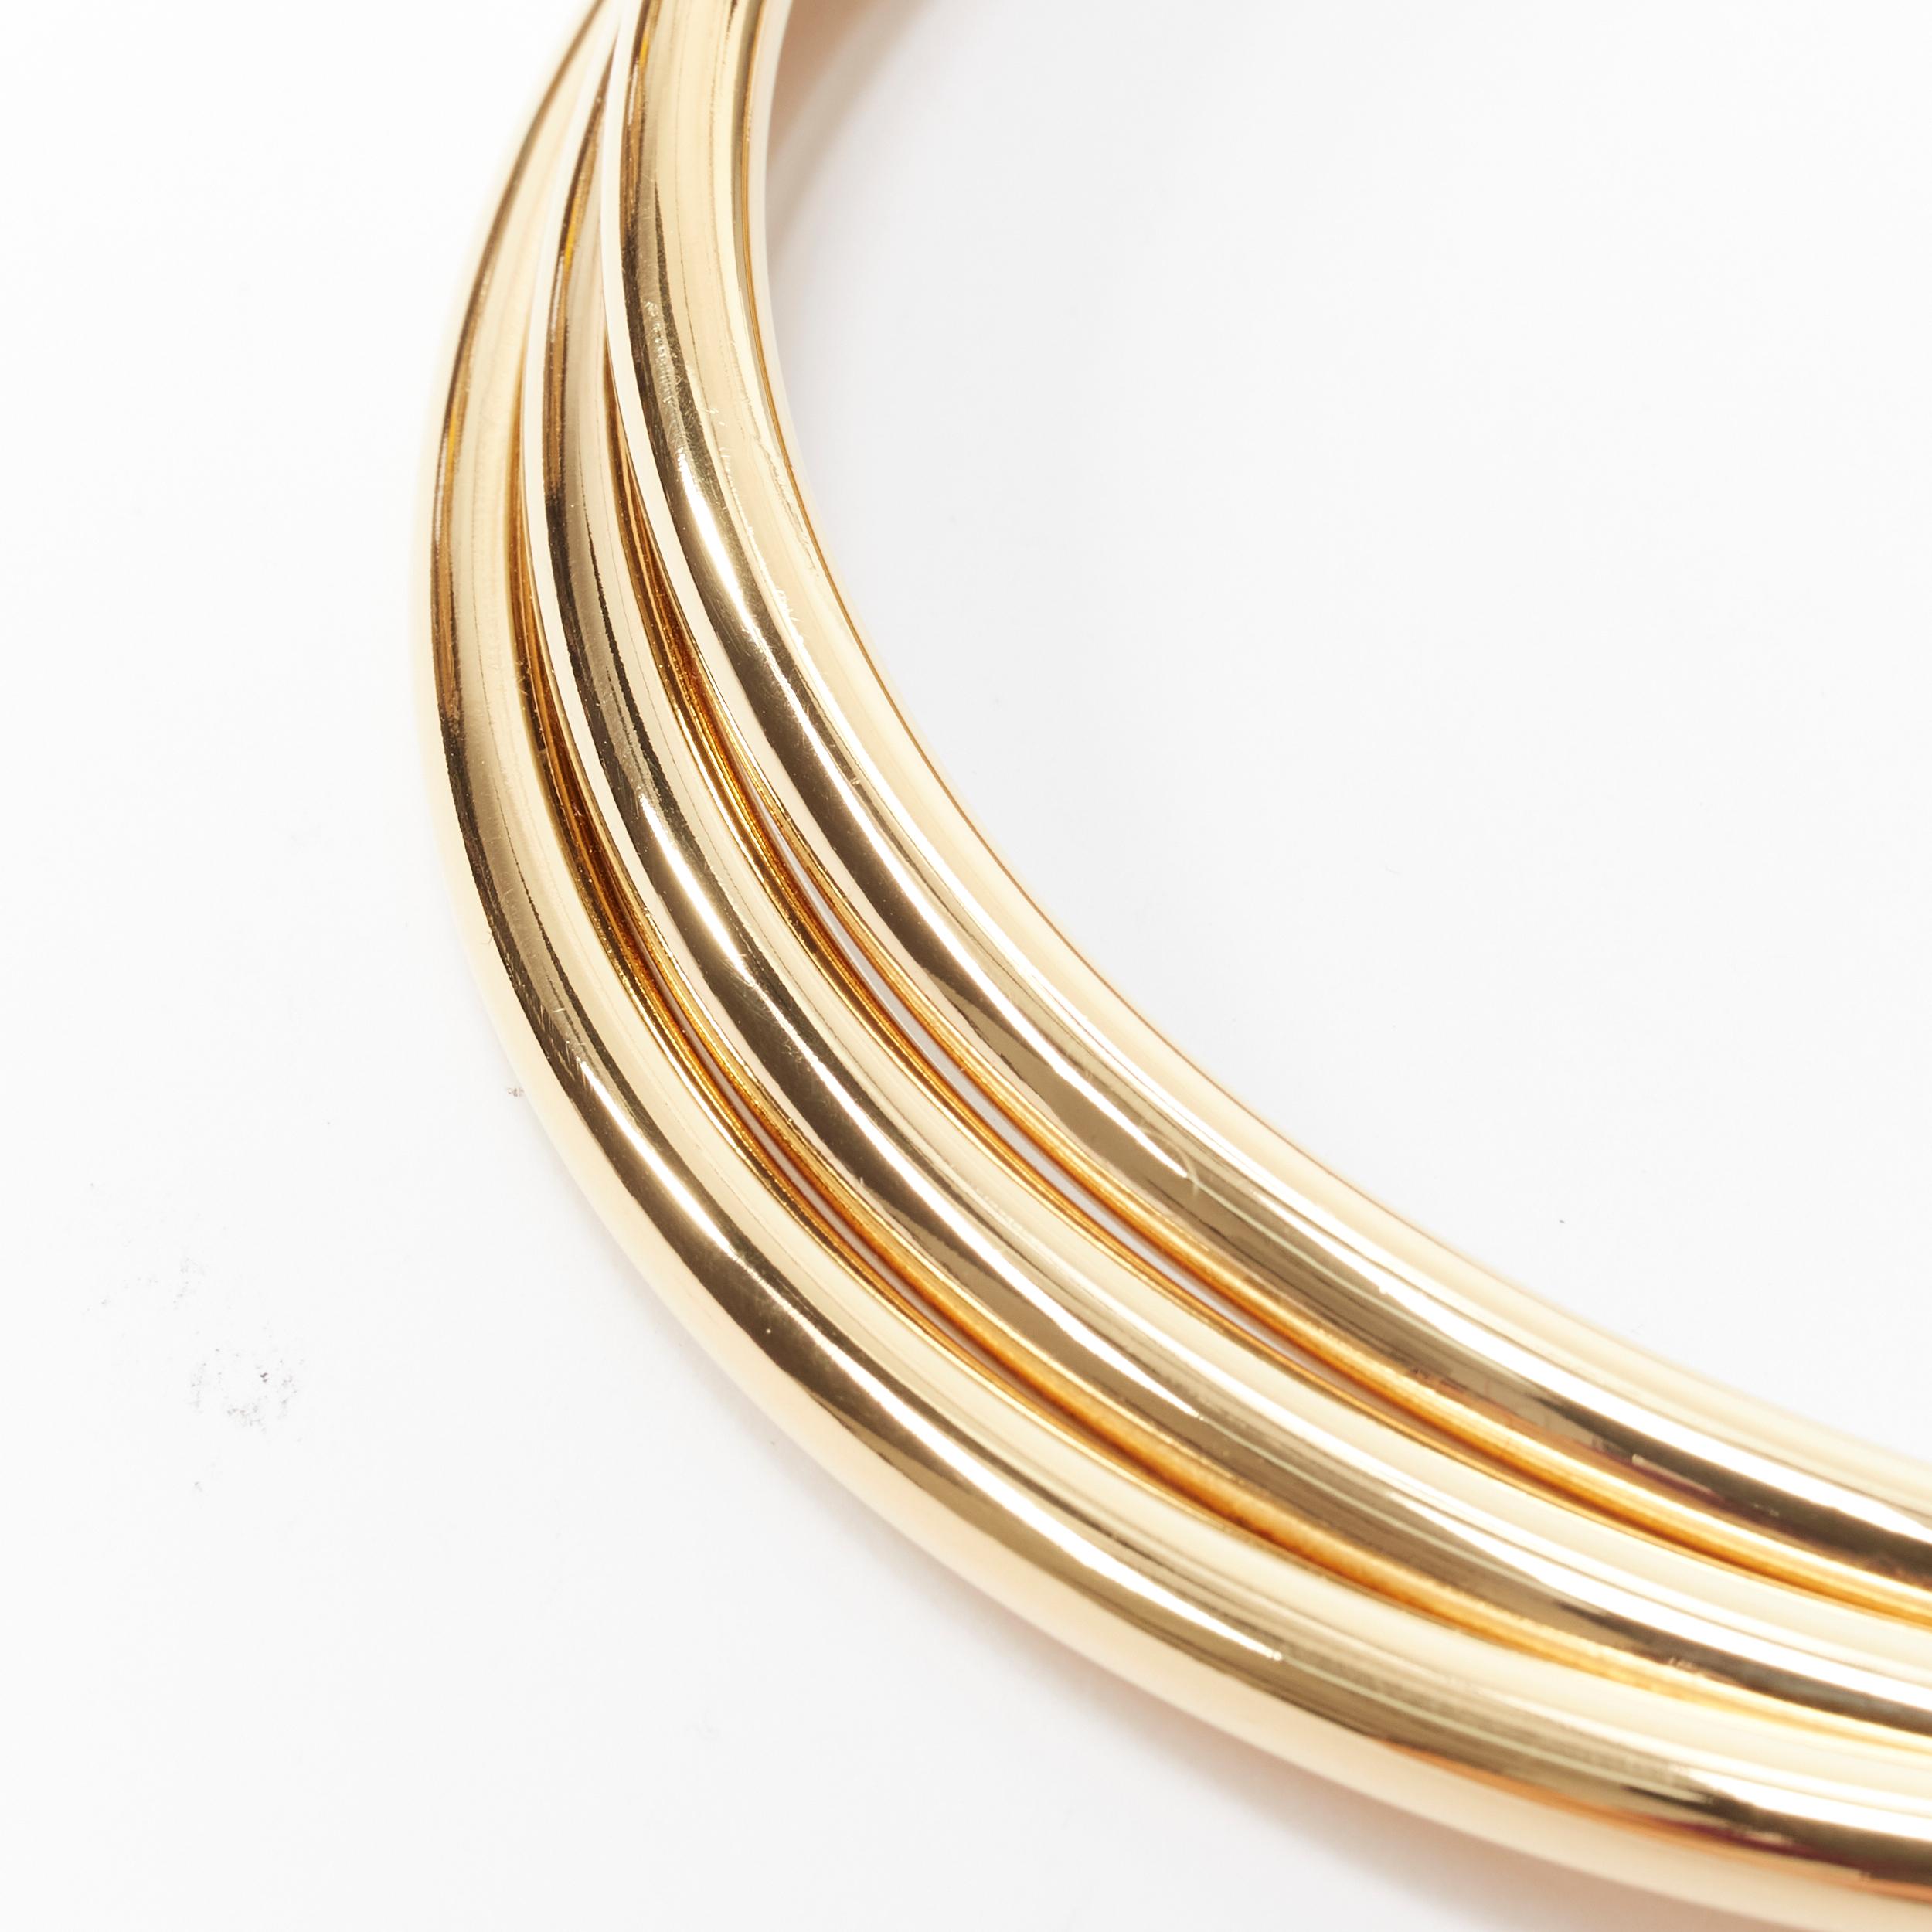 new SAINT LAURENT Hedi Slimane gold triple bar twisted choker necklace 
Reference: TGAS/B01730 
Brand: Saint Laurent 
Designer: Hedi Slimane 
Material: Metal 
Color: Gold 
Pattern: Solid 
Extra Detail: Triple bar twist choker necklace. Signed at